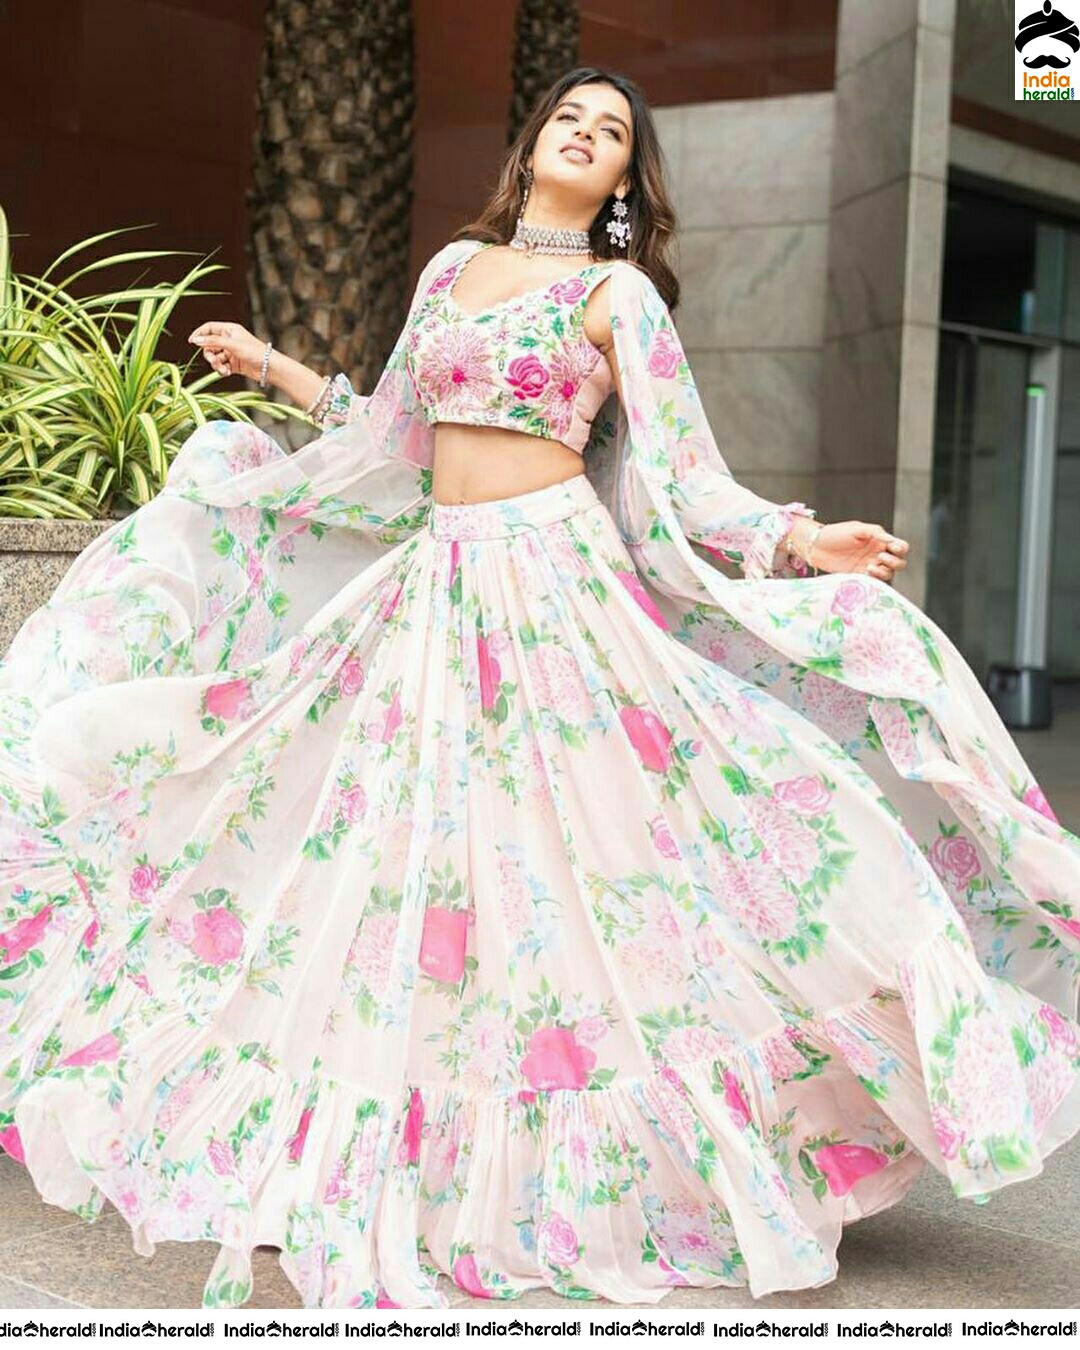 Nidhhi Agerwal Graceful In White And Pink Flower Design Choli